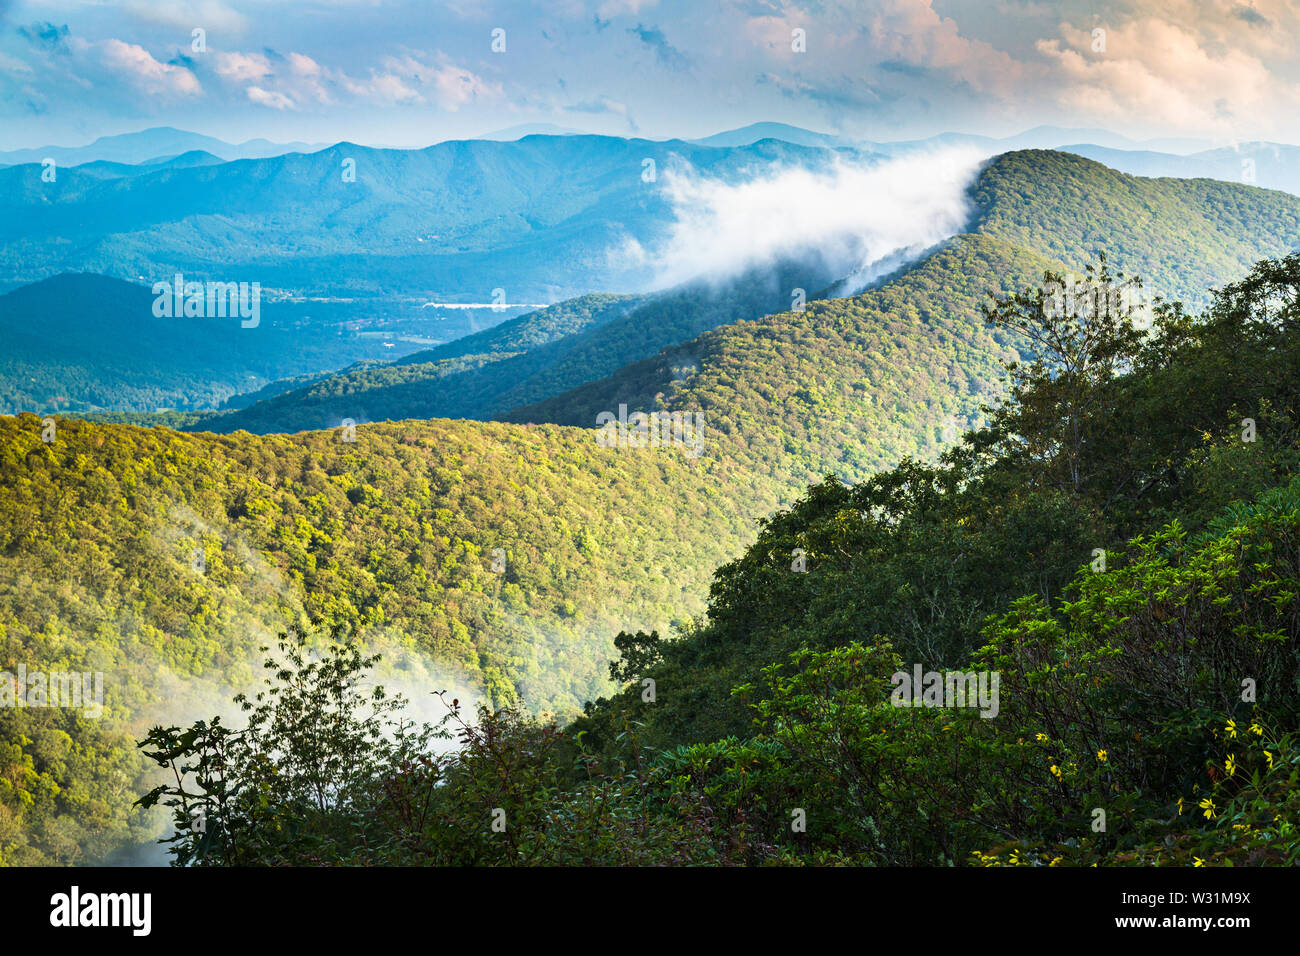 The Great Craggy Mountains from the Blue Ridge Parkway, North Carolina, USA. Stock Photo